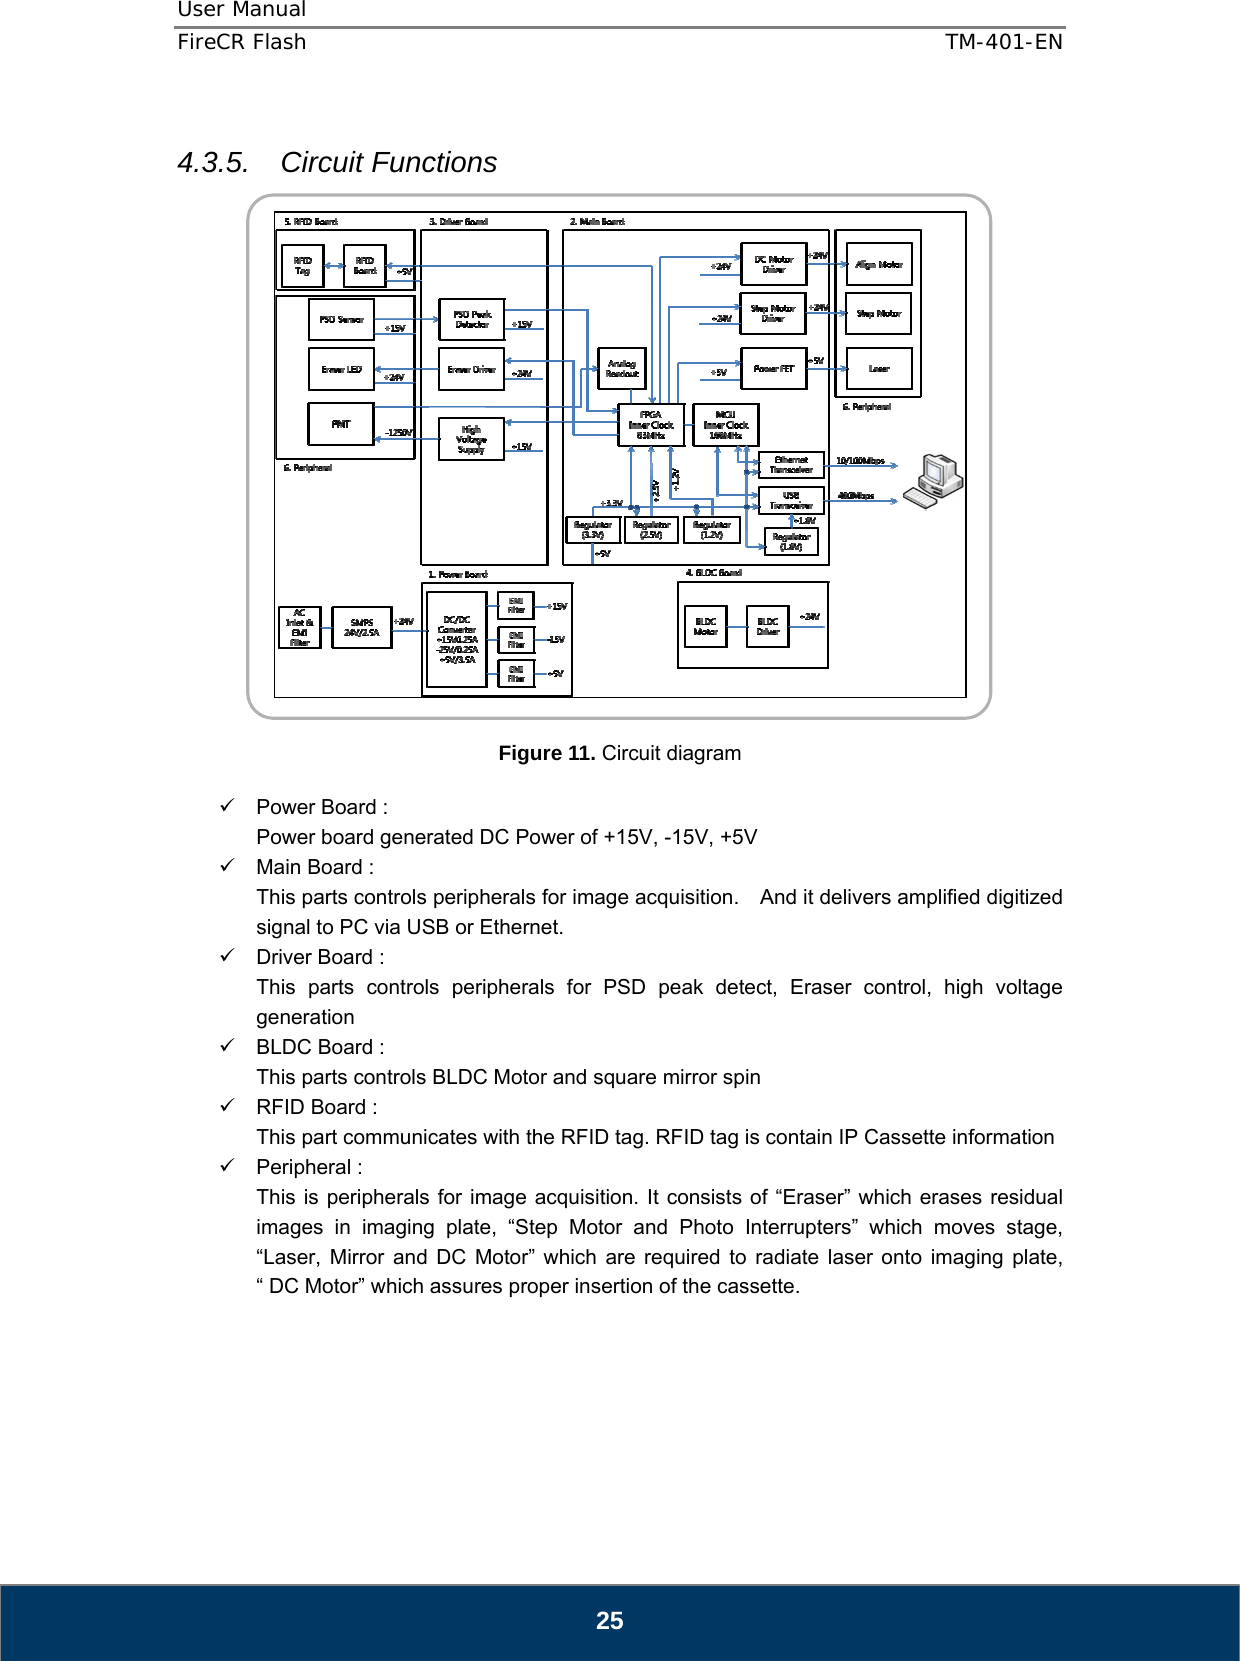 User Manual  FireCR Flash    TM-401-EN   25  4.3.5. Circuit Functions    Figure 11. Circuit diagram  9  Power Board :   Power board generated DC Power of +15V, -15V, +5V 9  Main Board : This parts controls peripherals for image acquisition.  And it delivers amplified digitized signal to PC via USB or Ethernet. 9  Driver Board : This parts controls peripherals for PSD peak detect, Eraser control, high voltage generation 9 BLDC Board : This parts controls BLDC Motor and square mirror spin   9  RFID Board : This part communicates with the RFID tag. RFID tag is contain IP Cassette information 9 Peripheral : This is peripherals for image acquisition. It consists of “Eraser” which erases residual images in imaging plate, “Step Motor and Photo Interrupters” which moves stage, “Laser, Mirror and DC Motor” which are required to radiate laser onto imaging plate, “ DC Motor” which assures proper insertion of the cassette.        